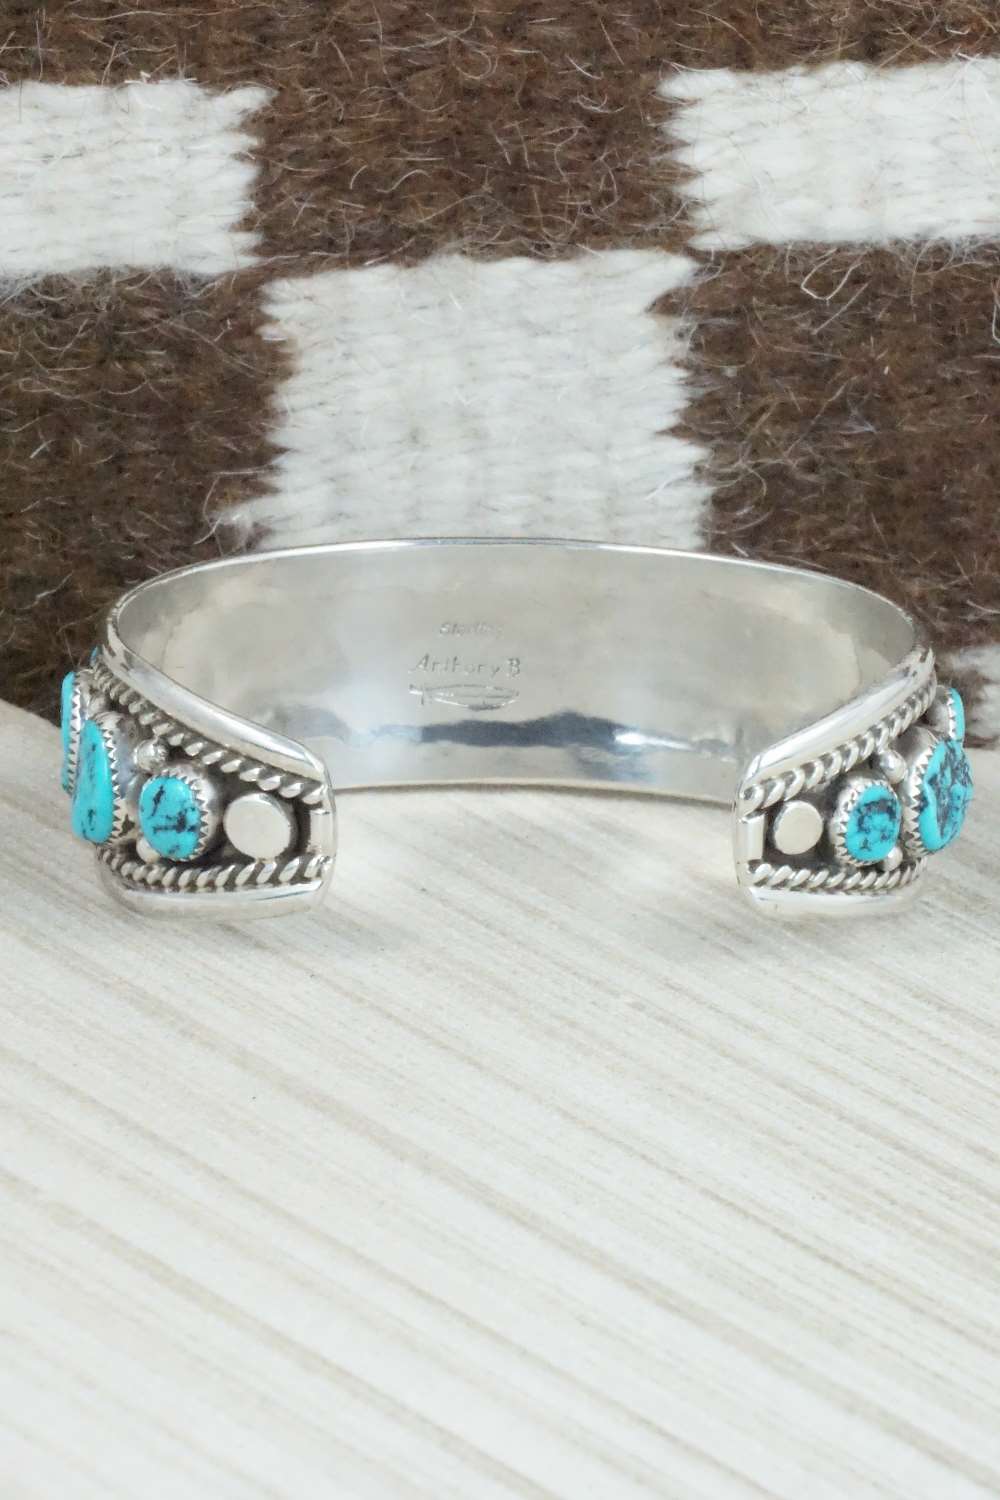 Turquoise & Sterling Silver Bracelet - Anthony Brown